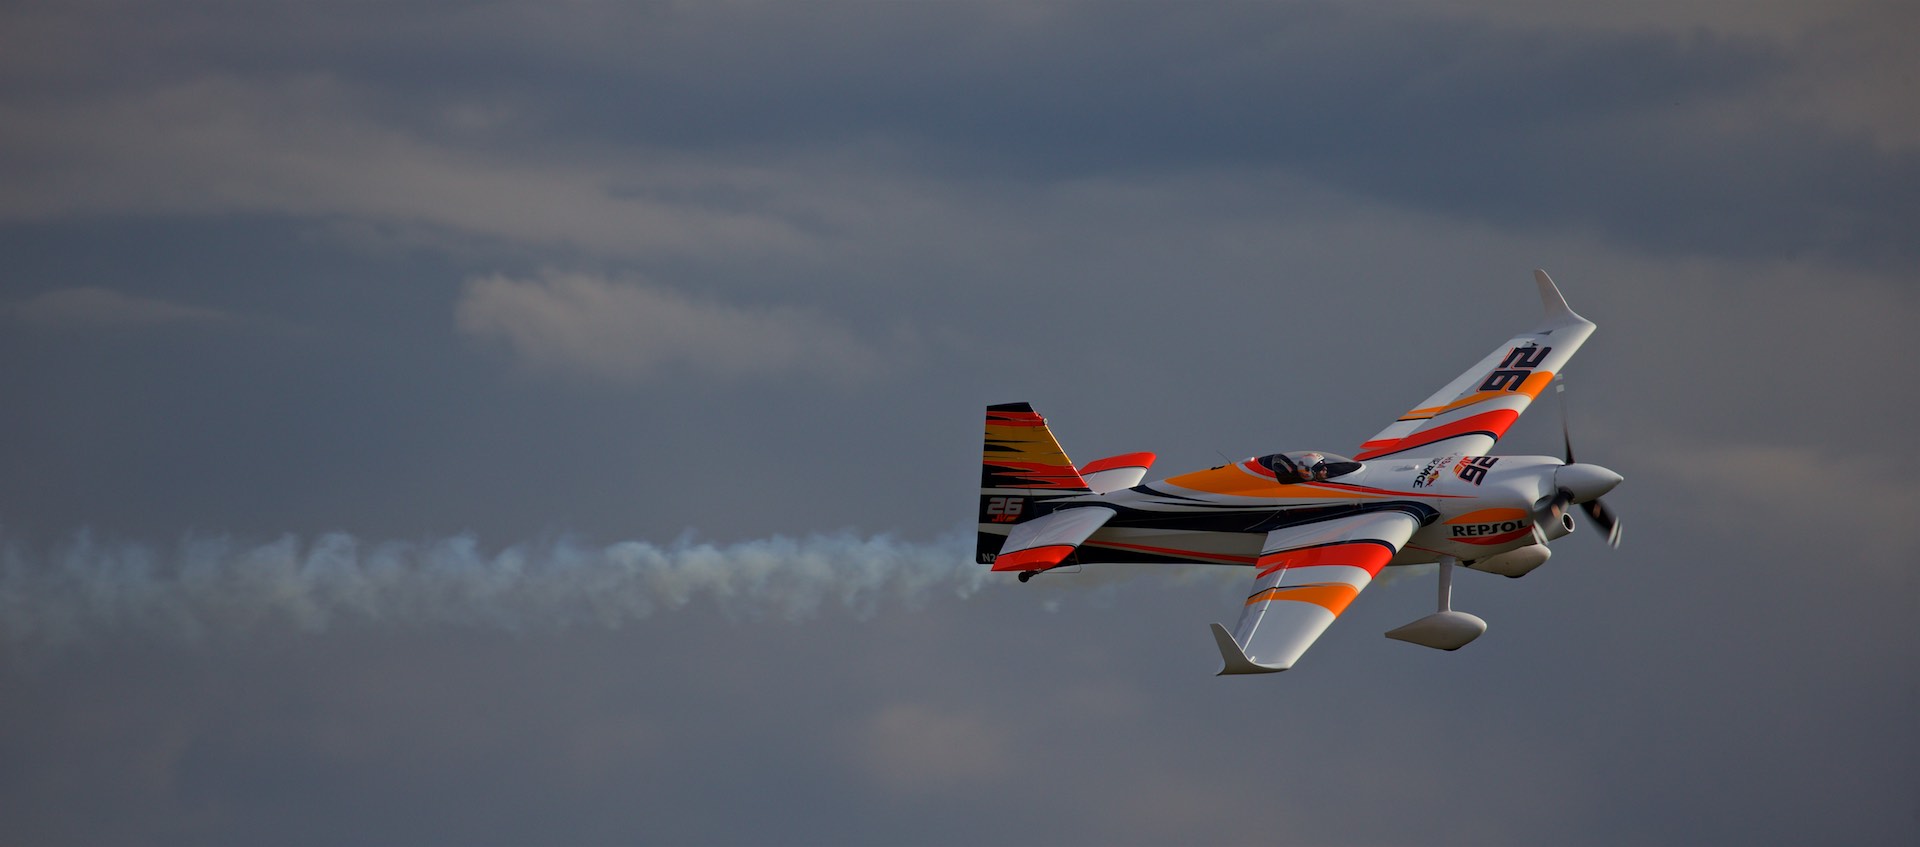 Red Bull Air Race, Lausitzring